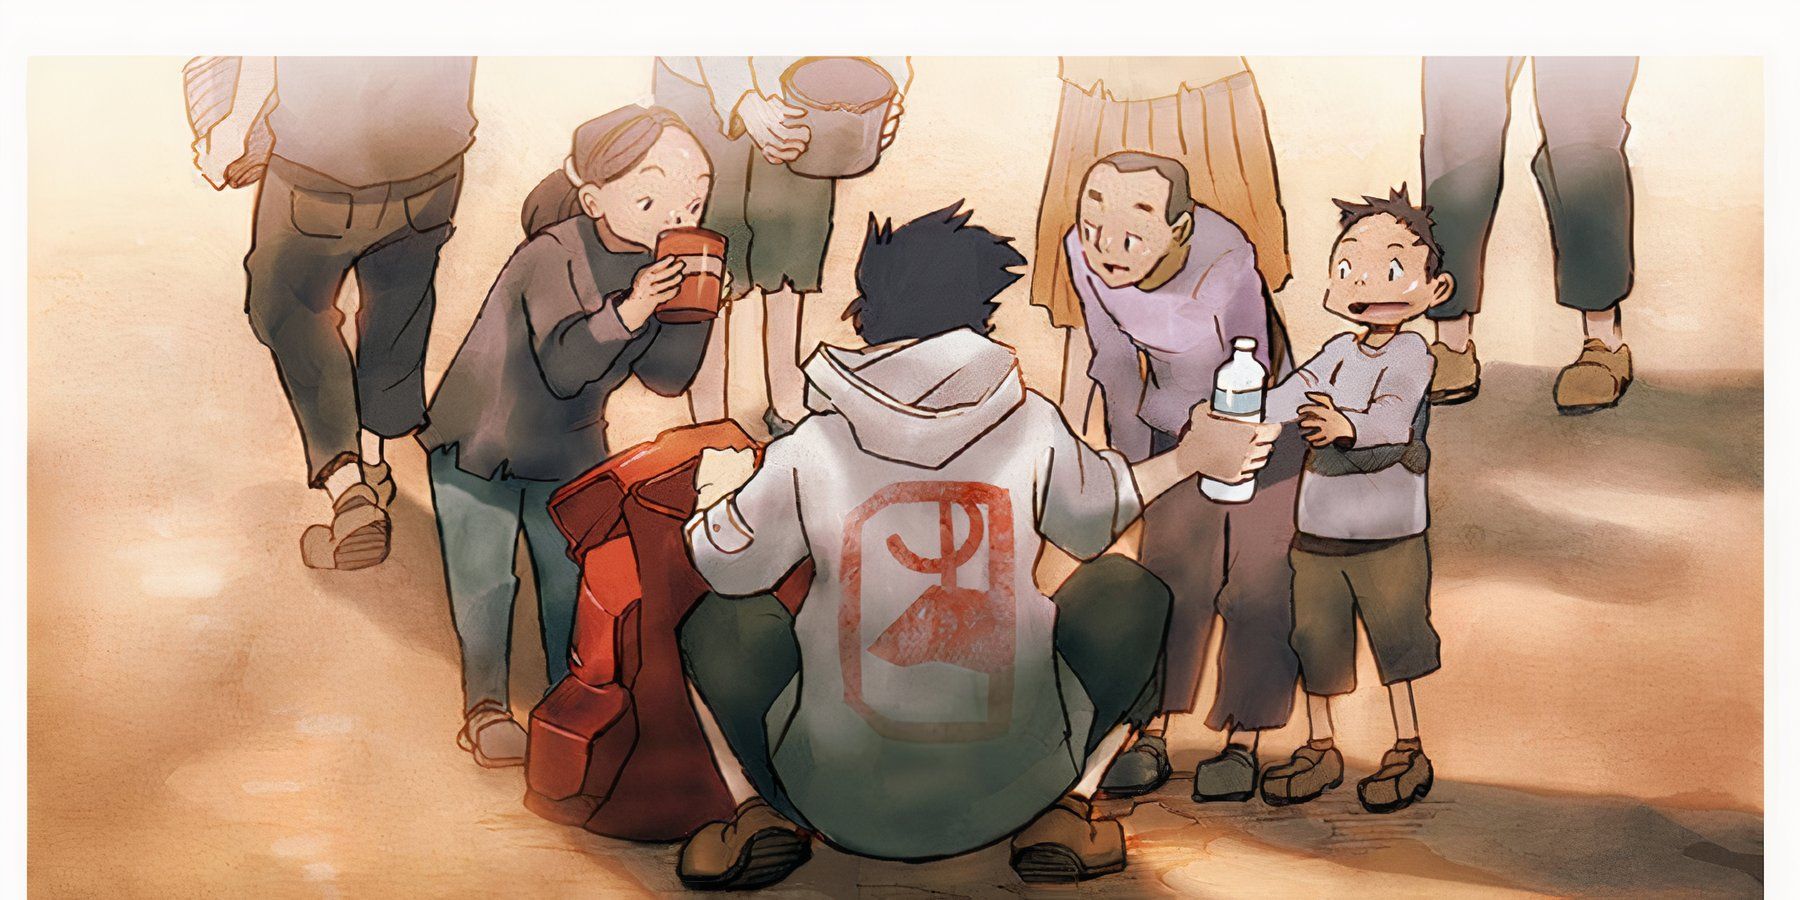 Noru from Noru giving food to the people around him